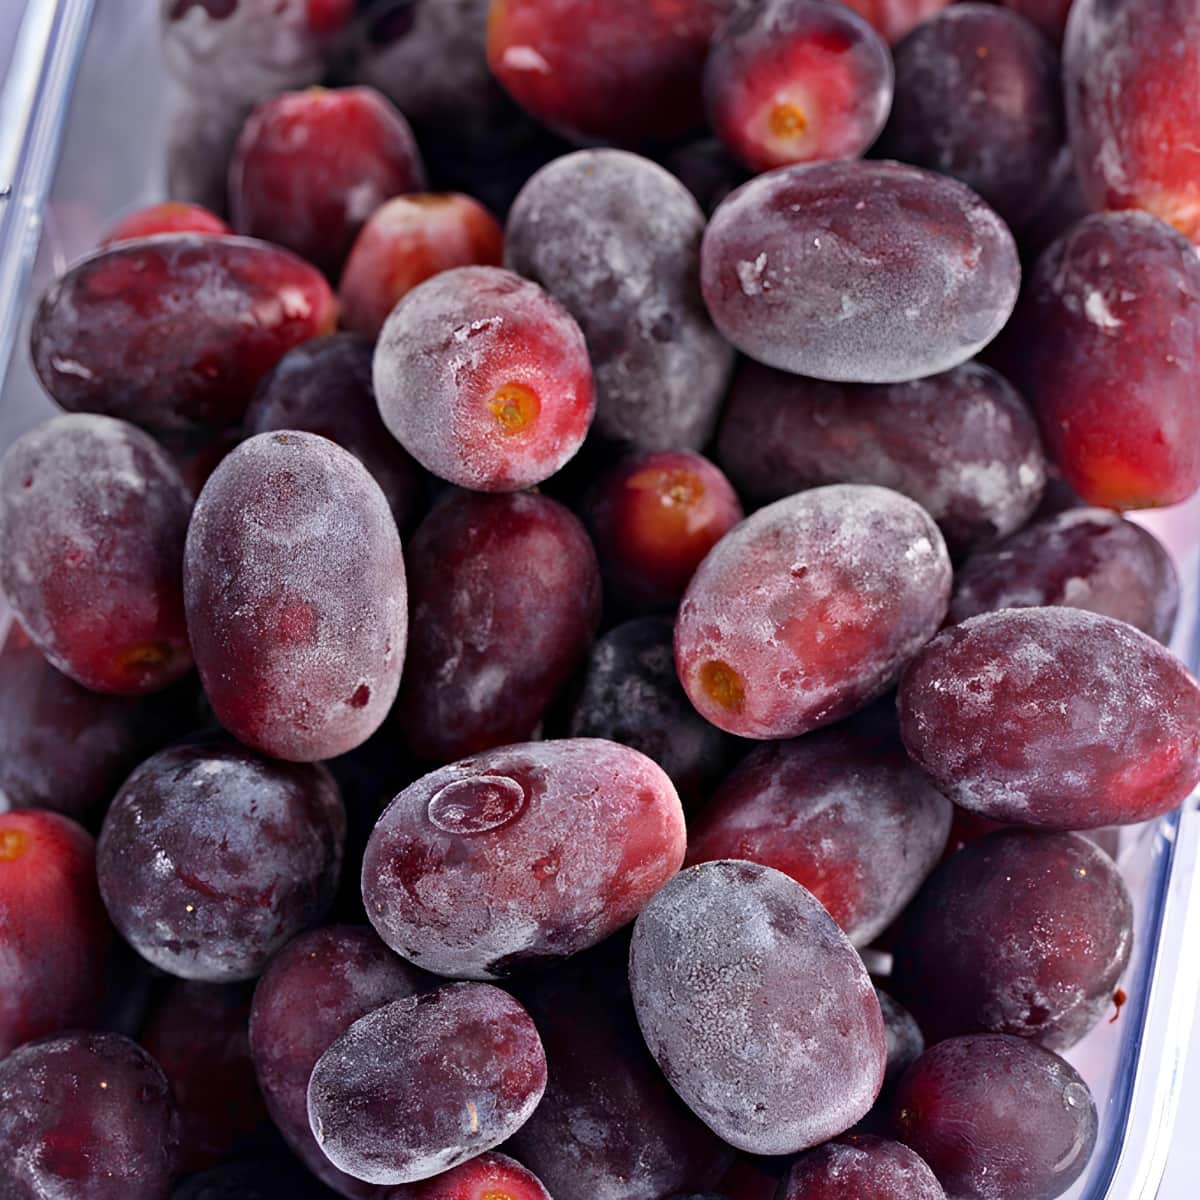 Frozen Grapes in a Plastic Container